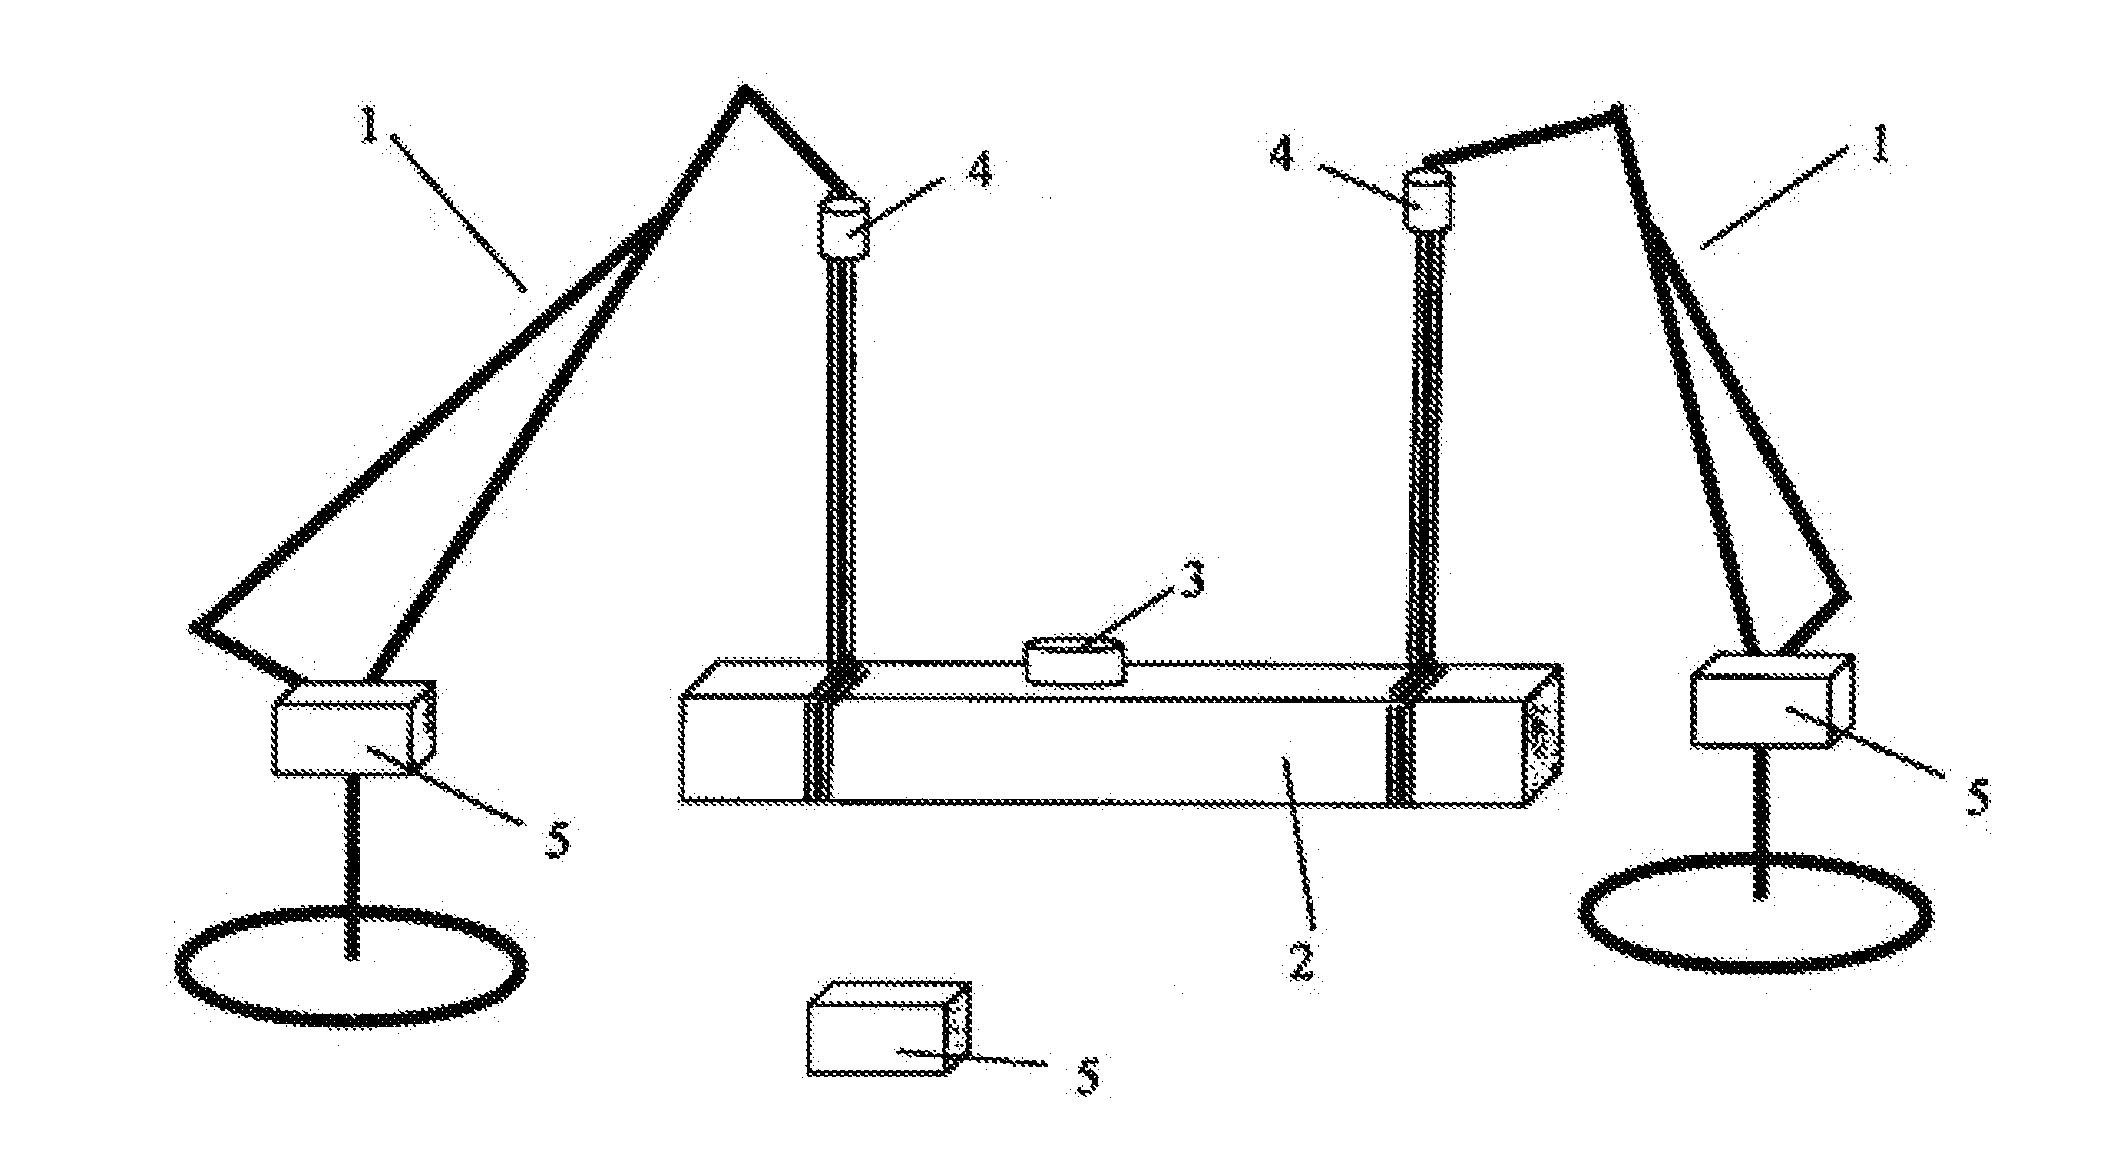 Crane, method and apparatus for monitoring the swing angle, weight or gesture of the crane load